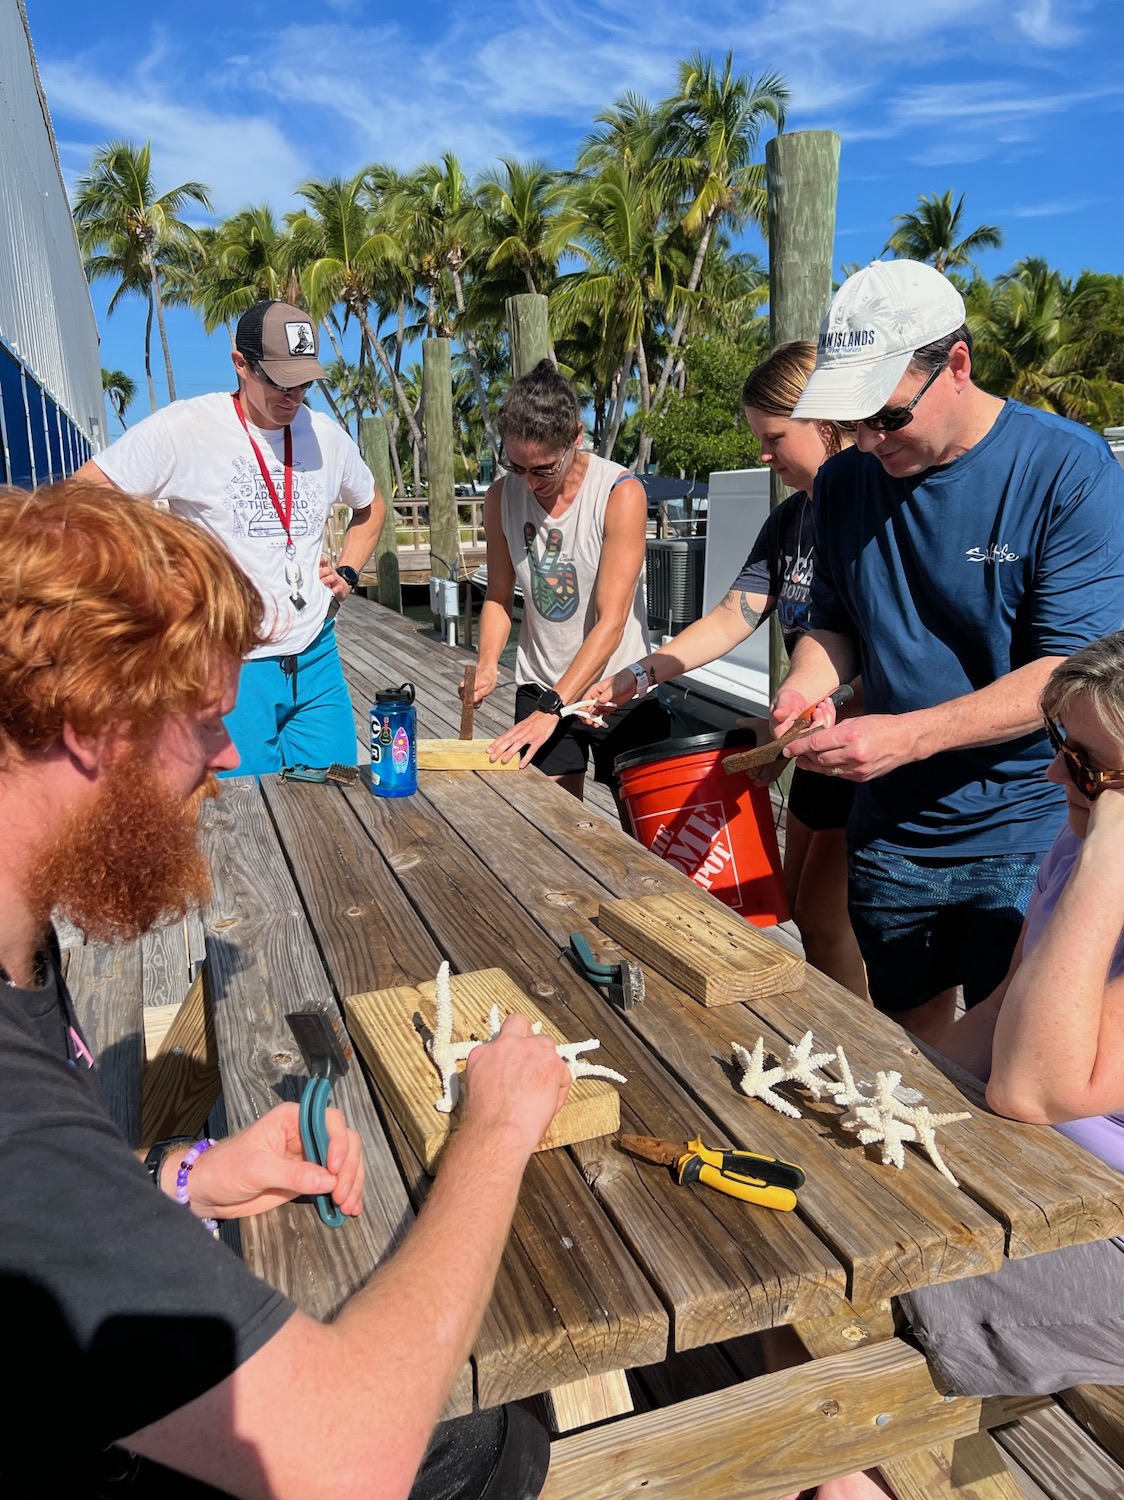 People gather around a table to work with coral fragments - restoration of coral reefs